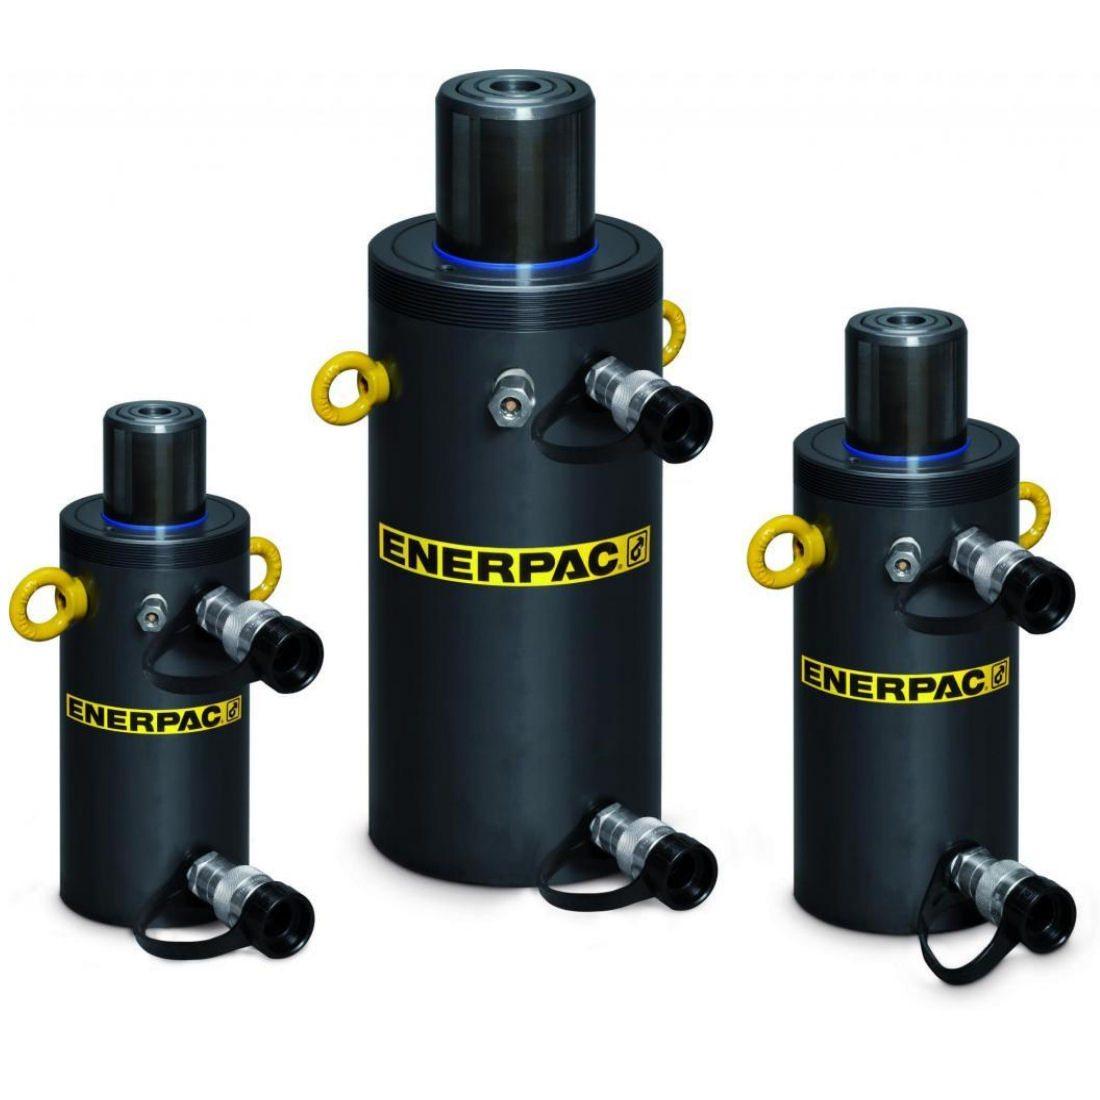 Enerpac hcr series double acting high tonnage jacking cylinders